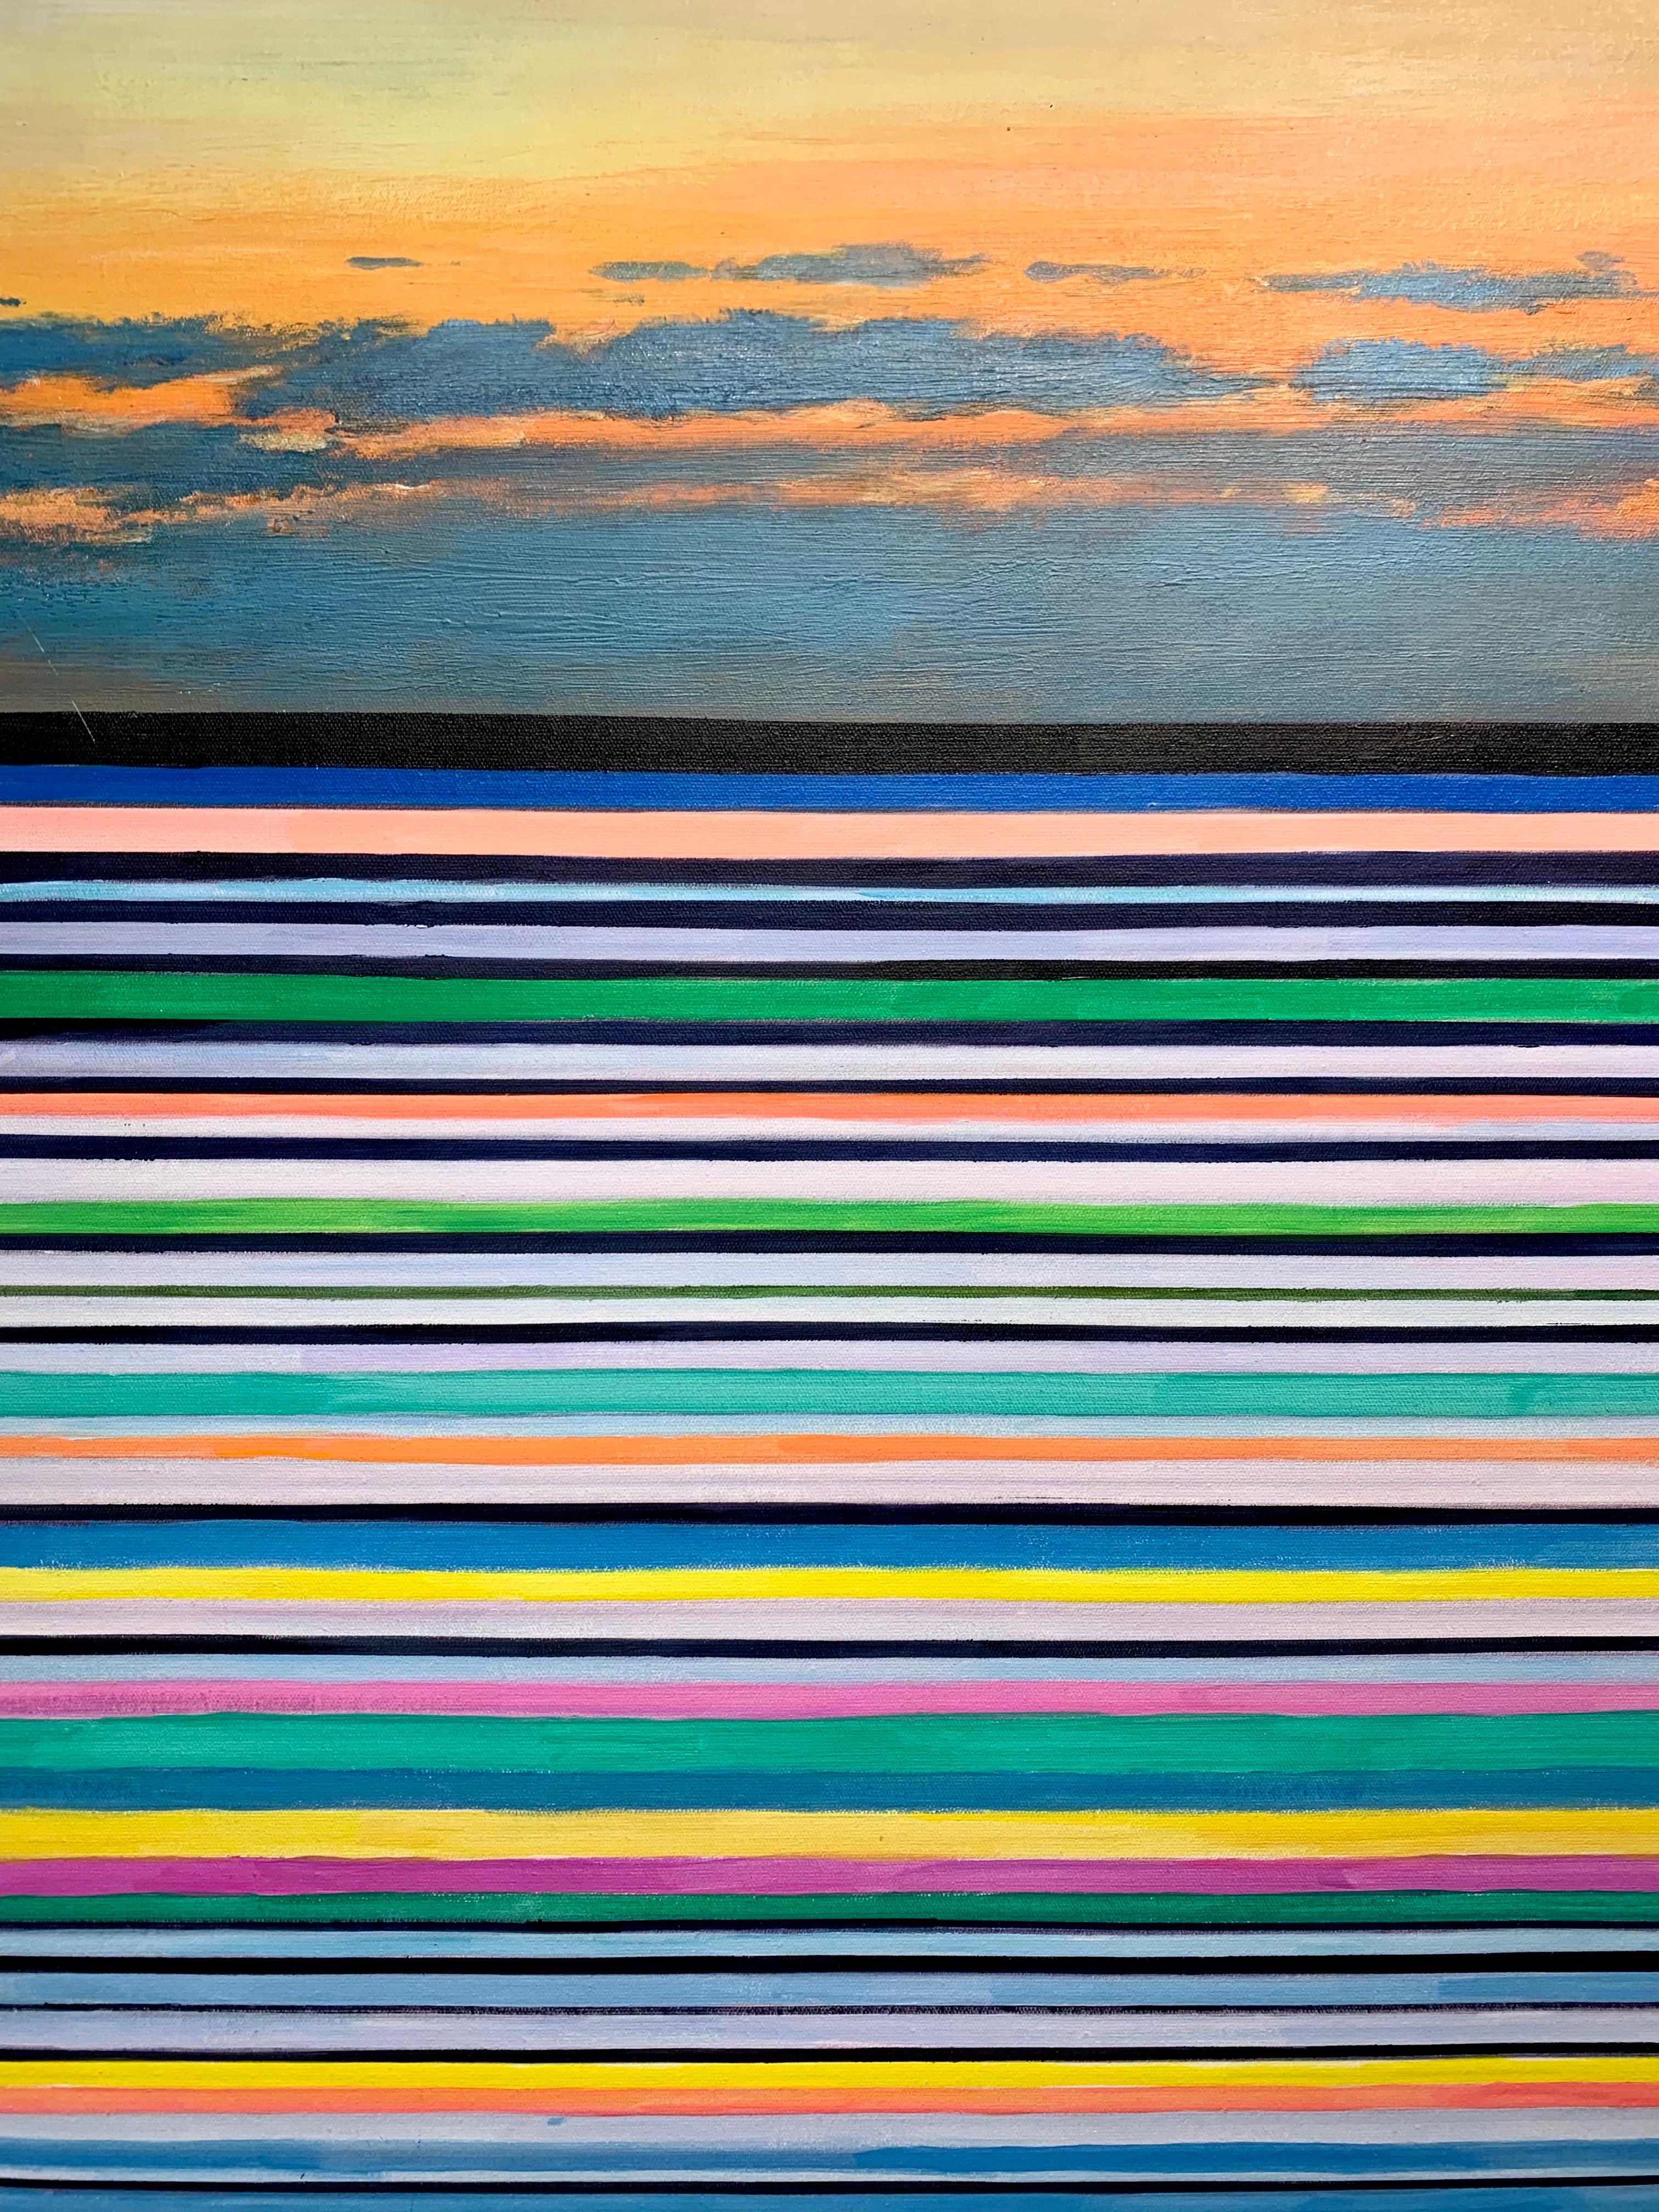 Horizon by Kate Seaborne - contemporary seascape painting Blue Ocean 3